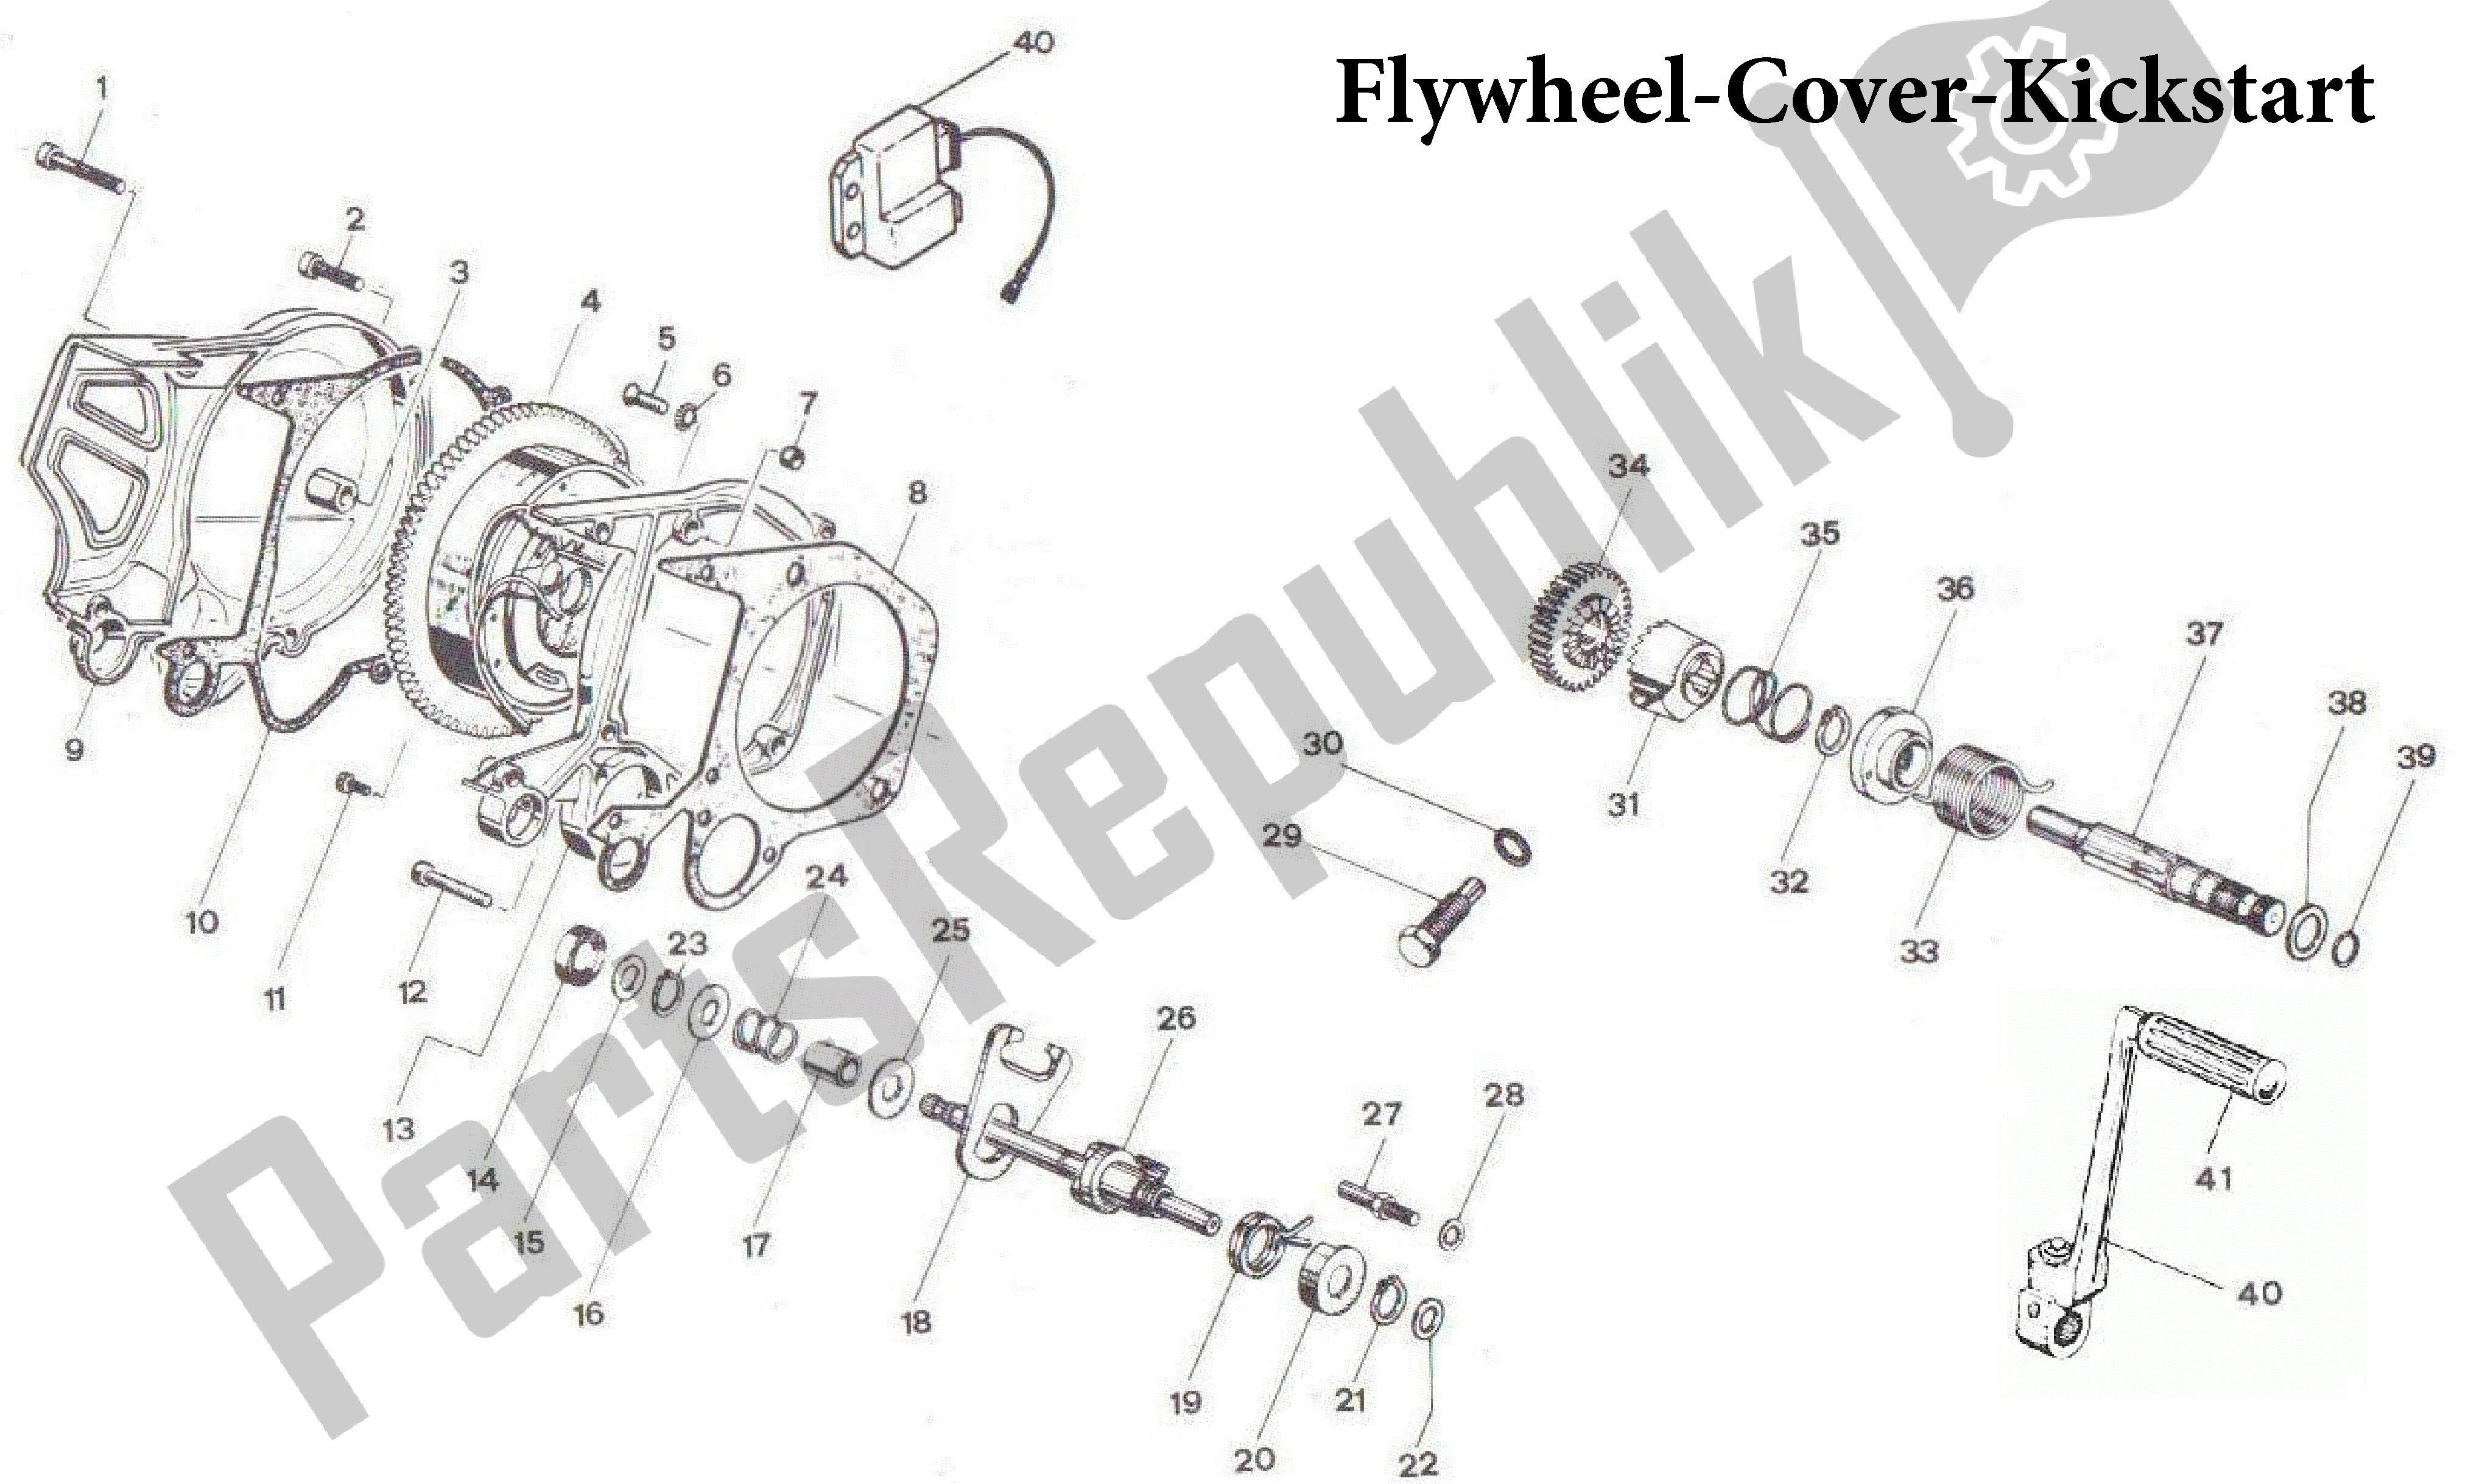 All parts for the Flywheel-cover-kickstart of the Aprilia Red Rose 50 1992